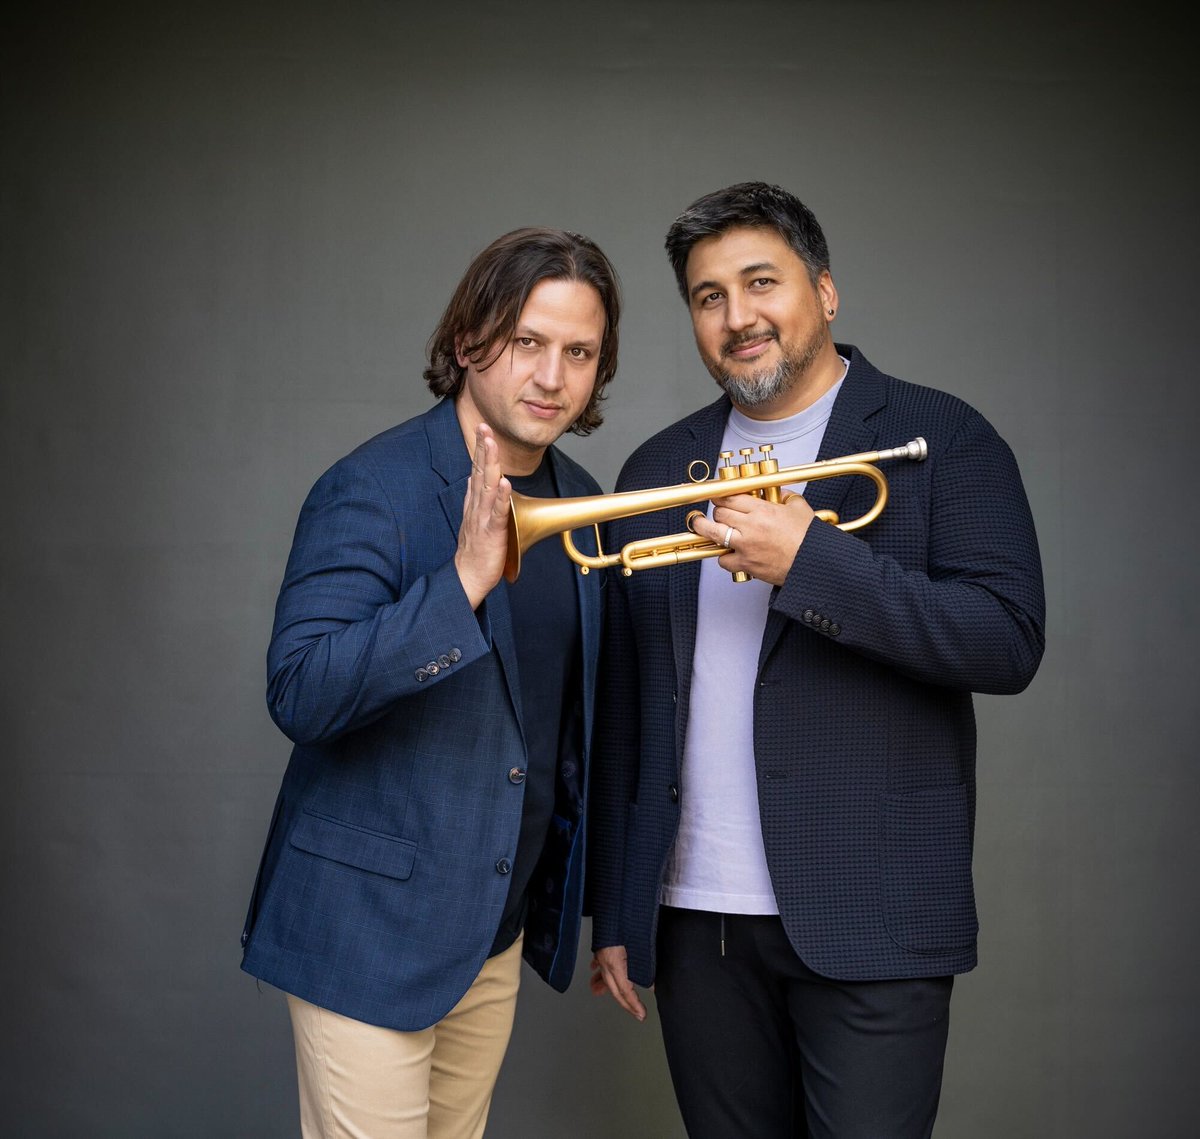 Experience The Rodriguez Brothers at Spring 2024 Jazz at One on April 8th at St. Paul's Chapel! In-person and online options available. Presented by Trinity Church Wall St & JAZZ HOUSE KiDS, curated by Ted Chubb. trinitywallstreet.org/music